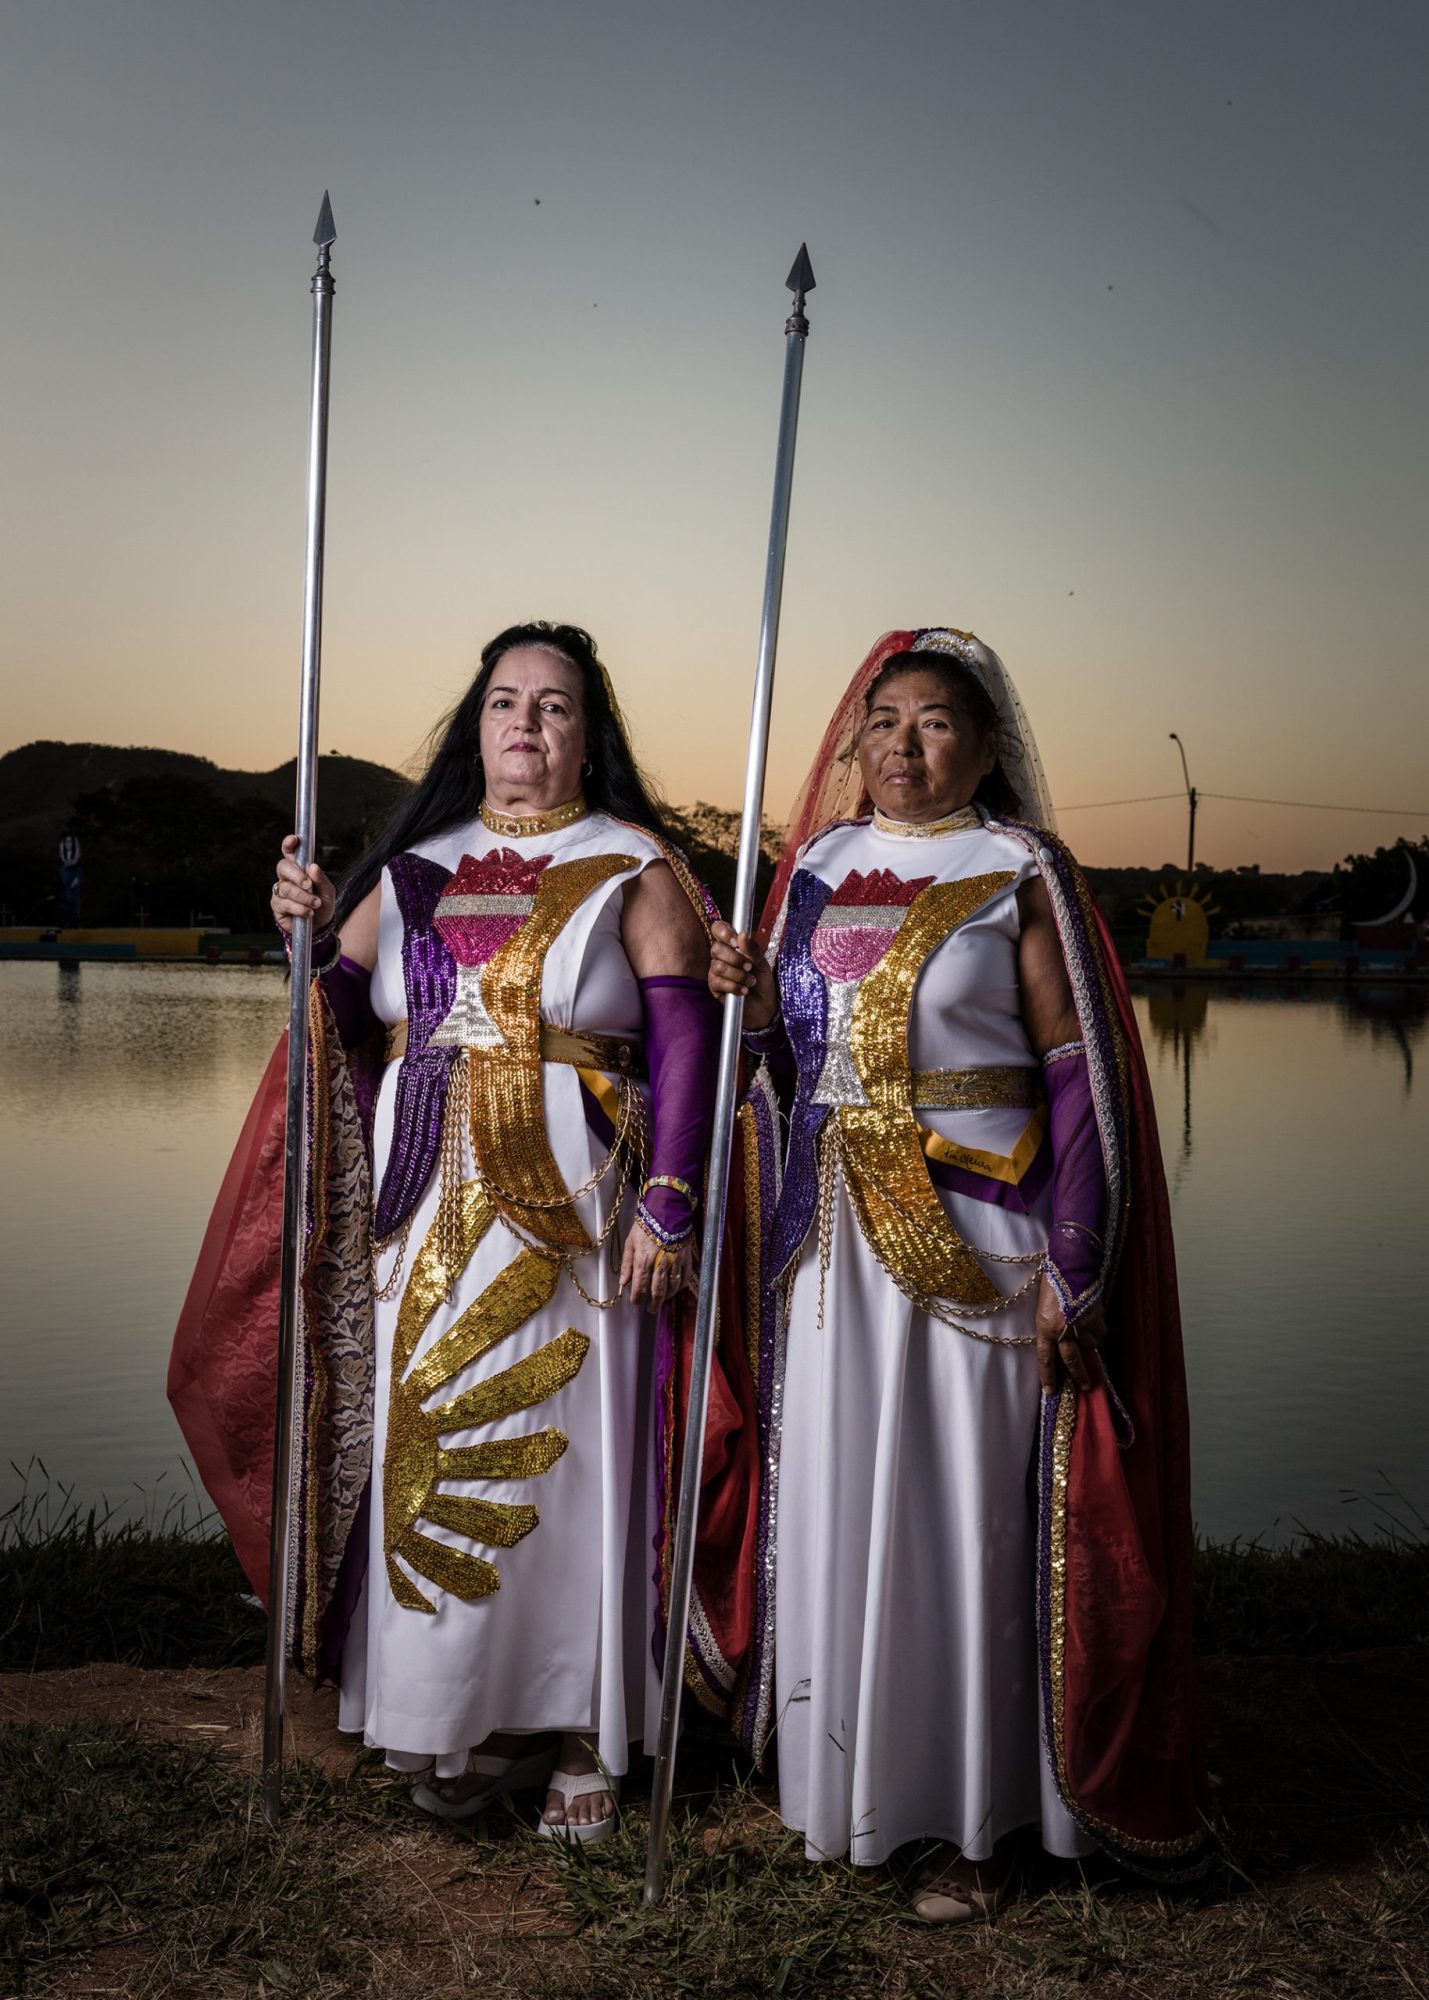 Women in ceremonial outfit.